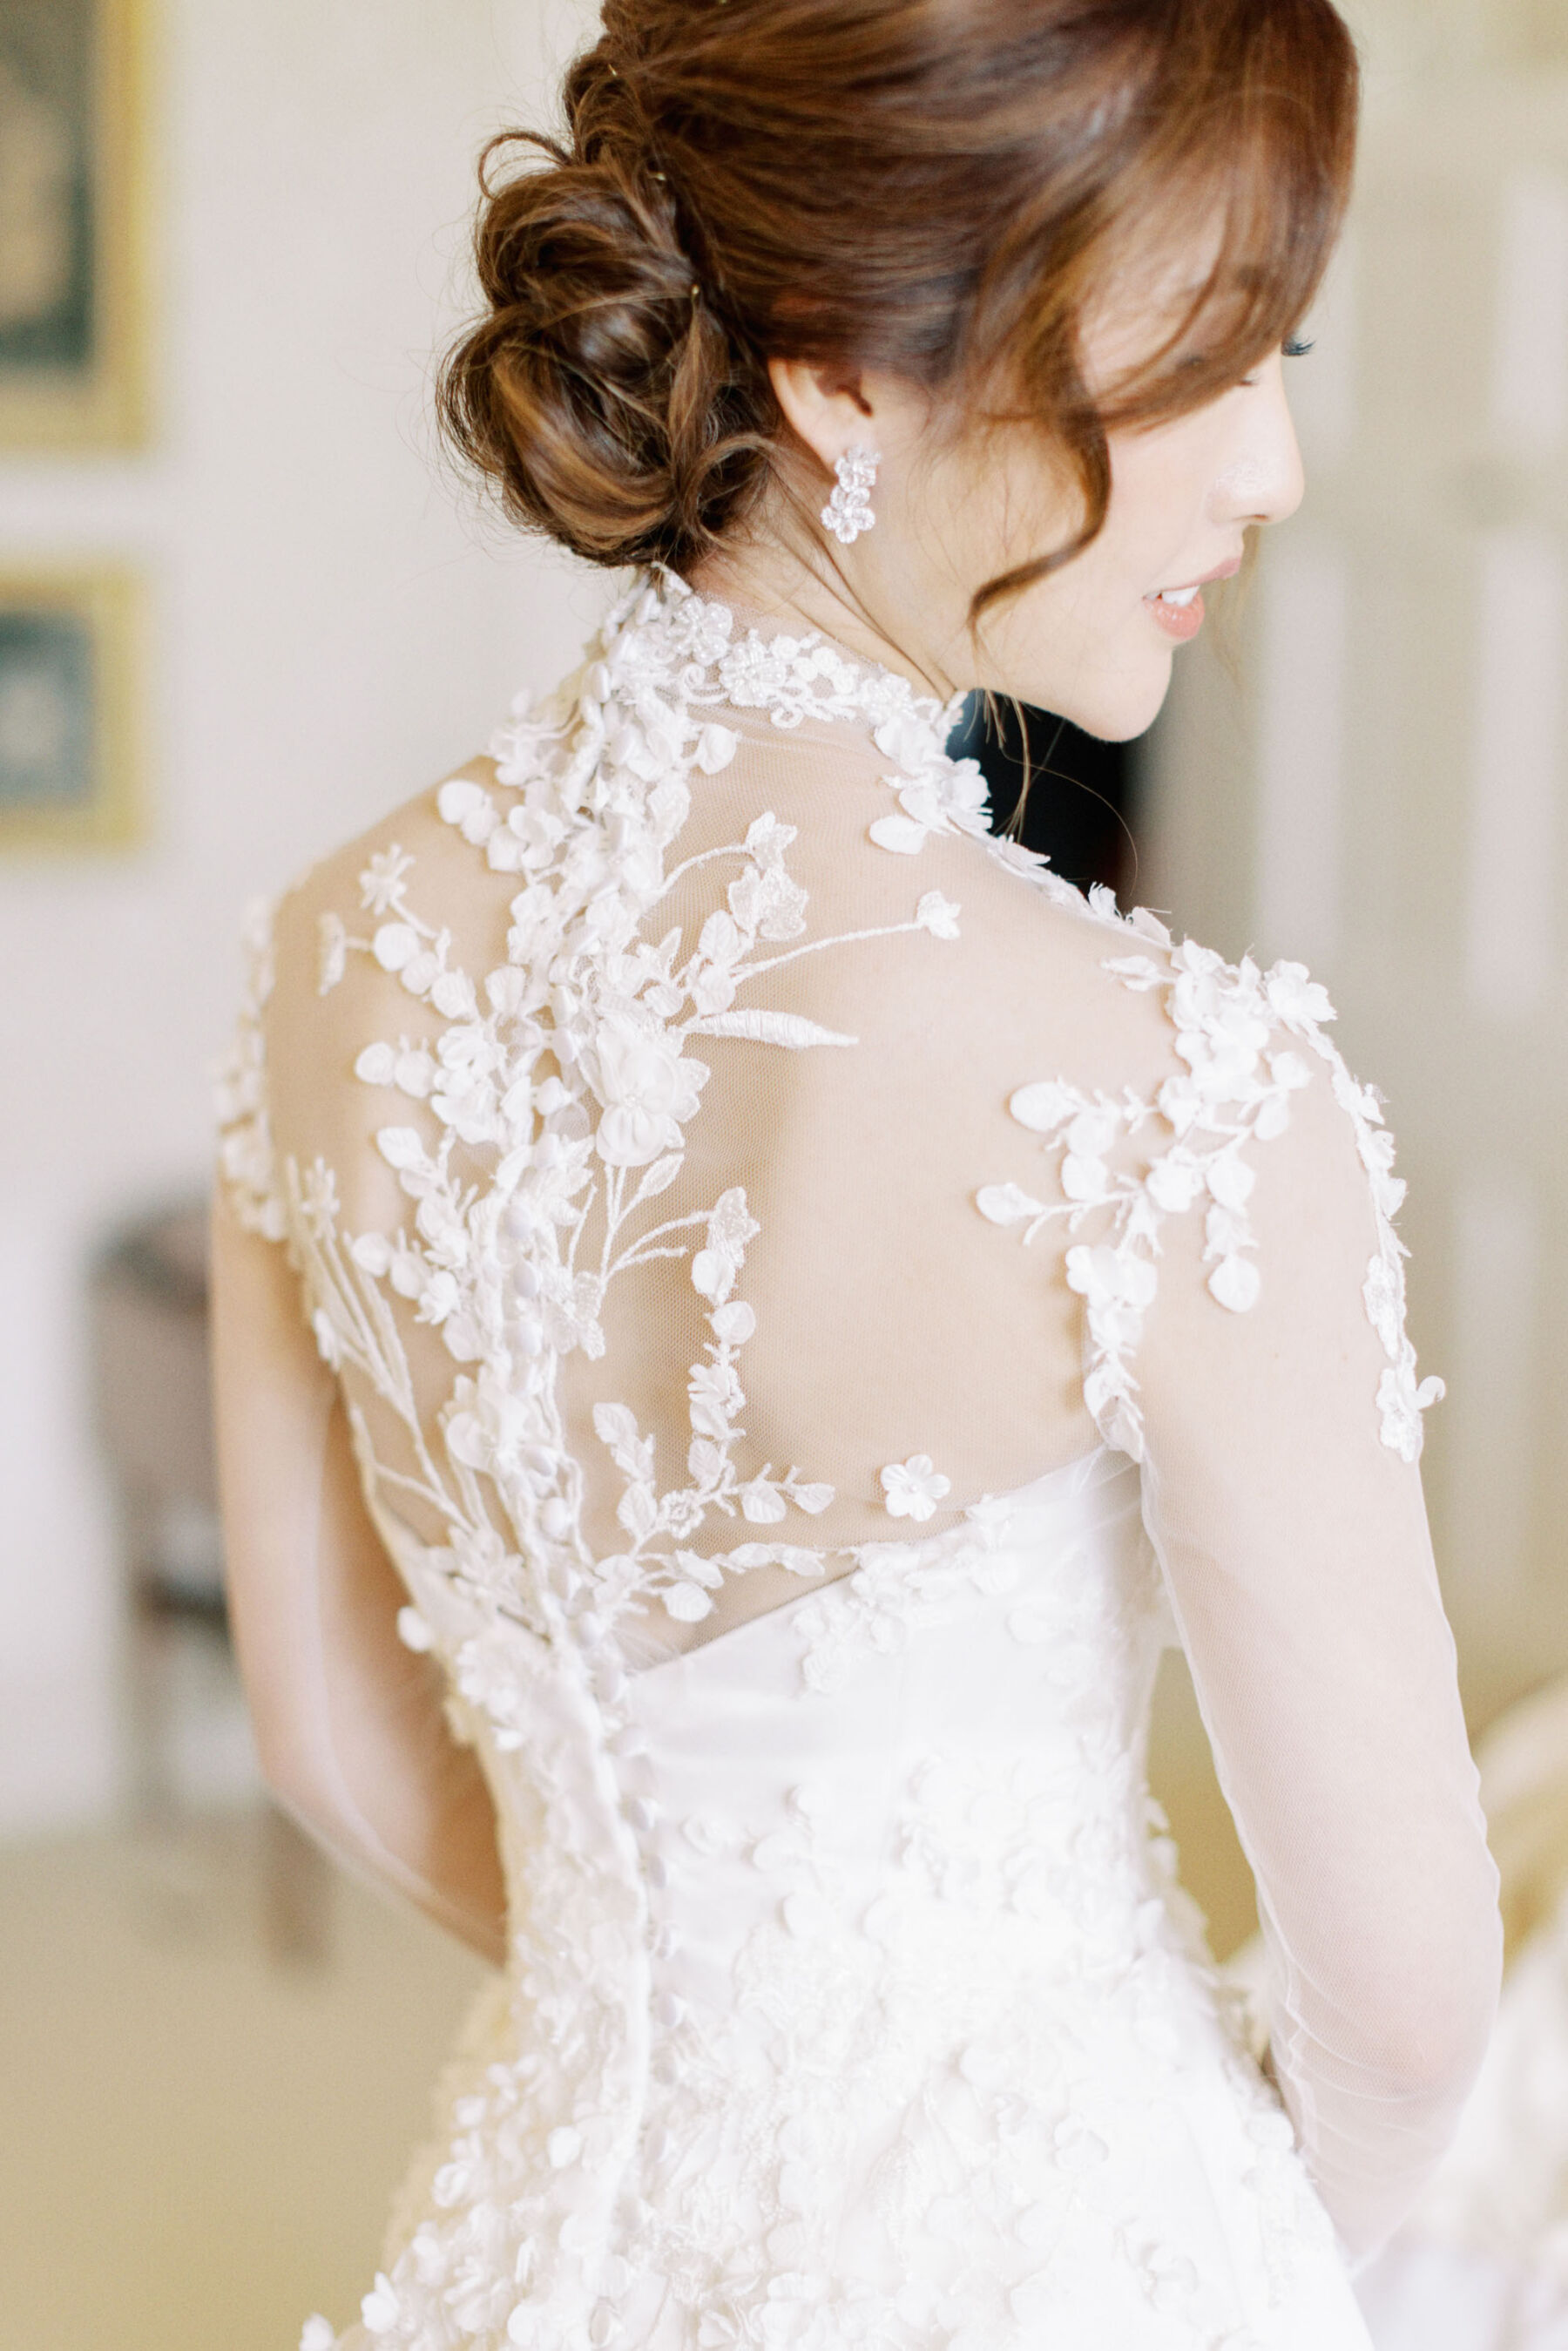 Chinese bride in couture bridal gown with floral lace by Sally Bean Couture